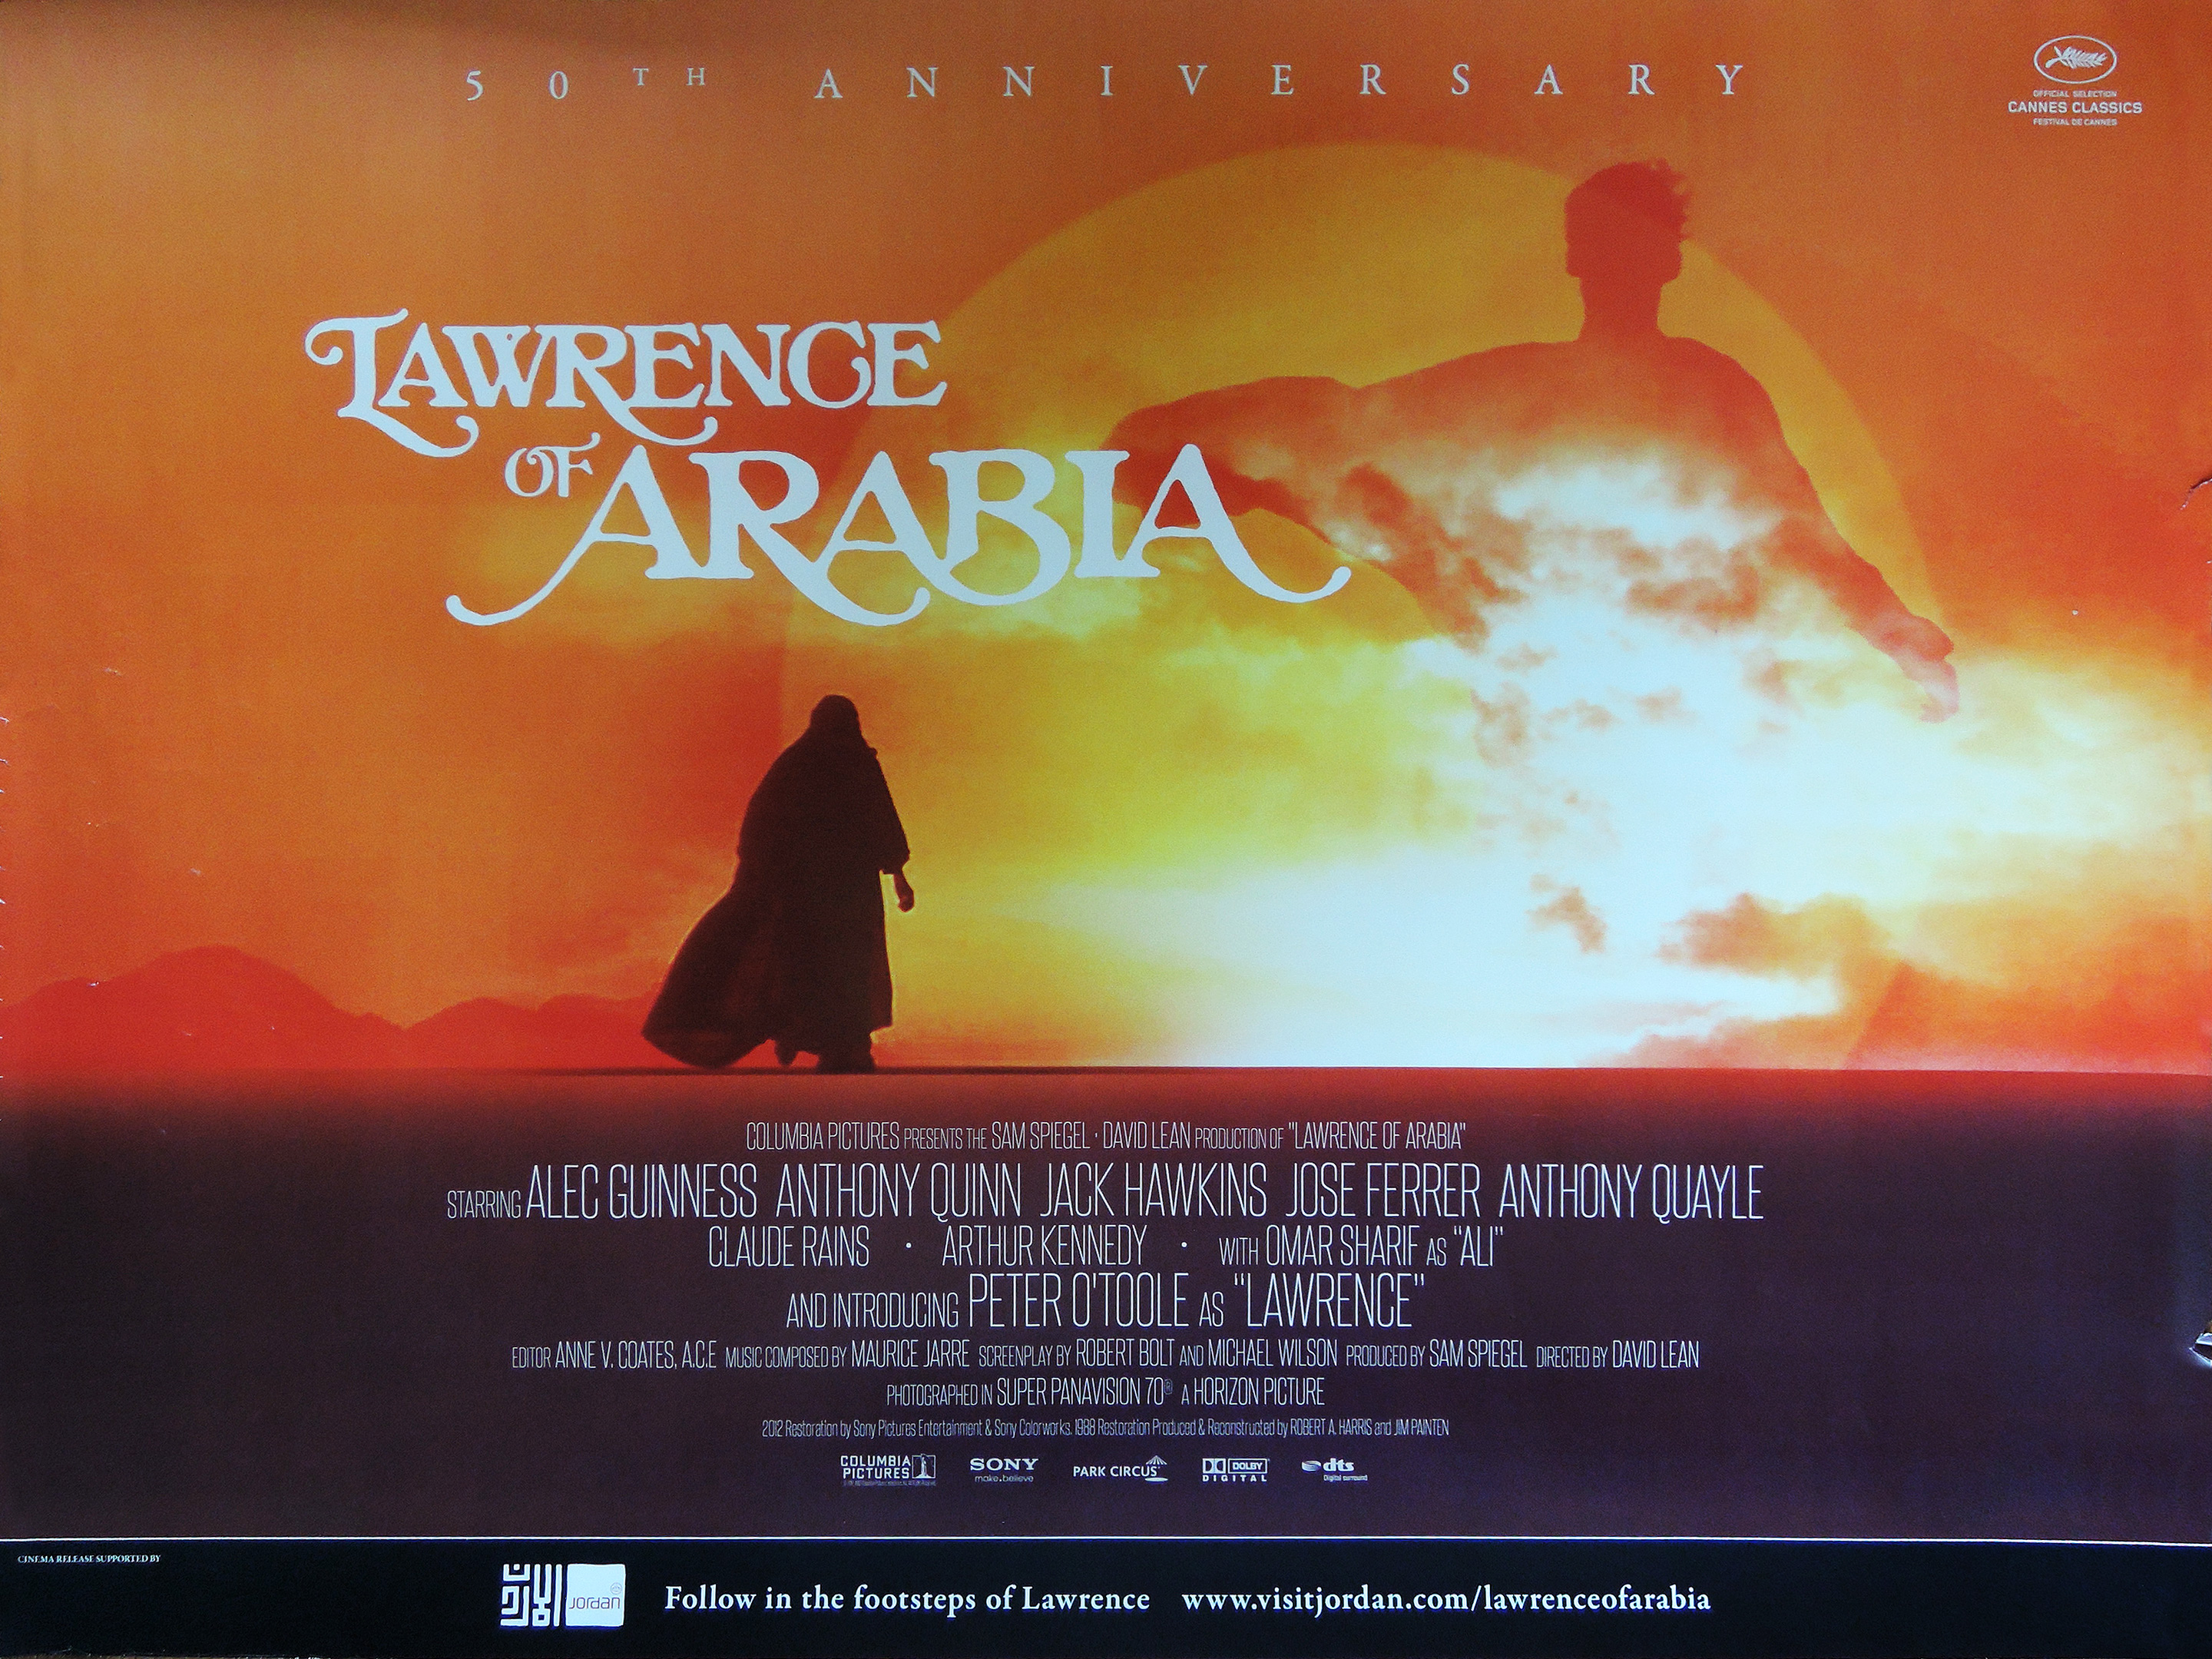 Lawrence Of Arabia 50th Anniversary re-release movie quad poster